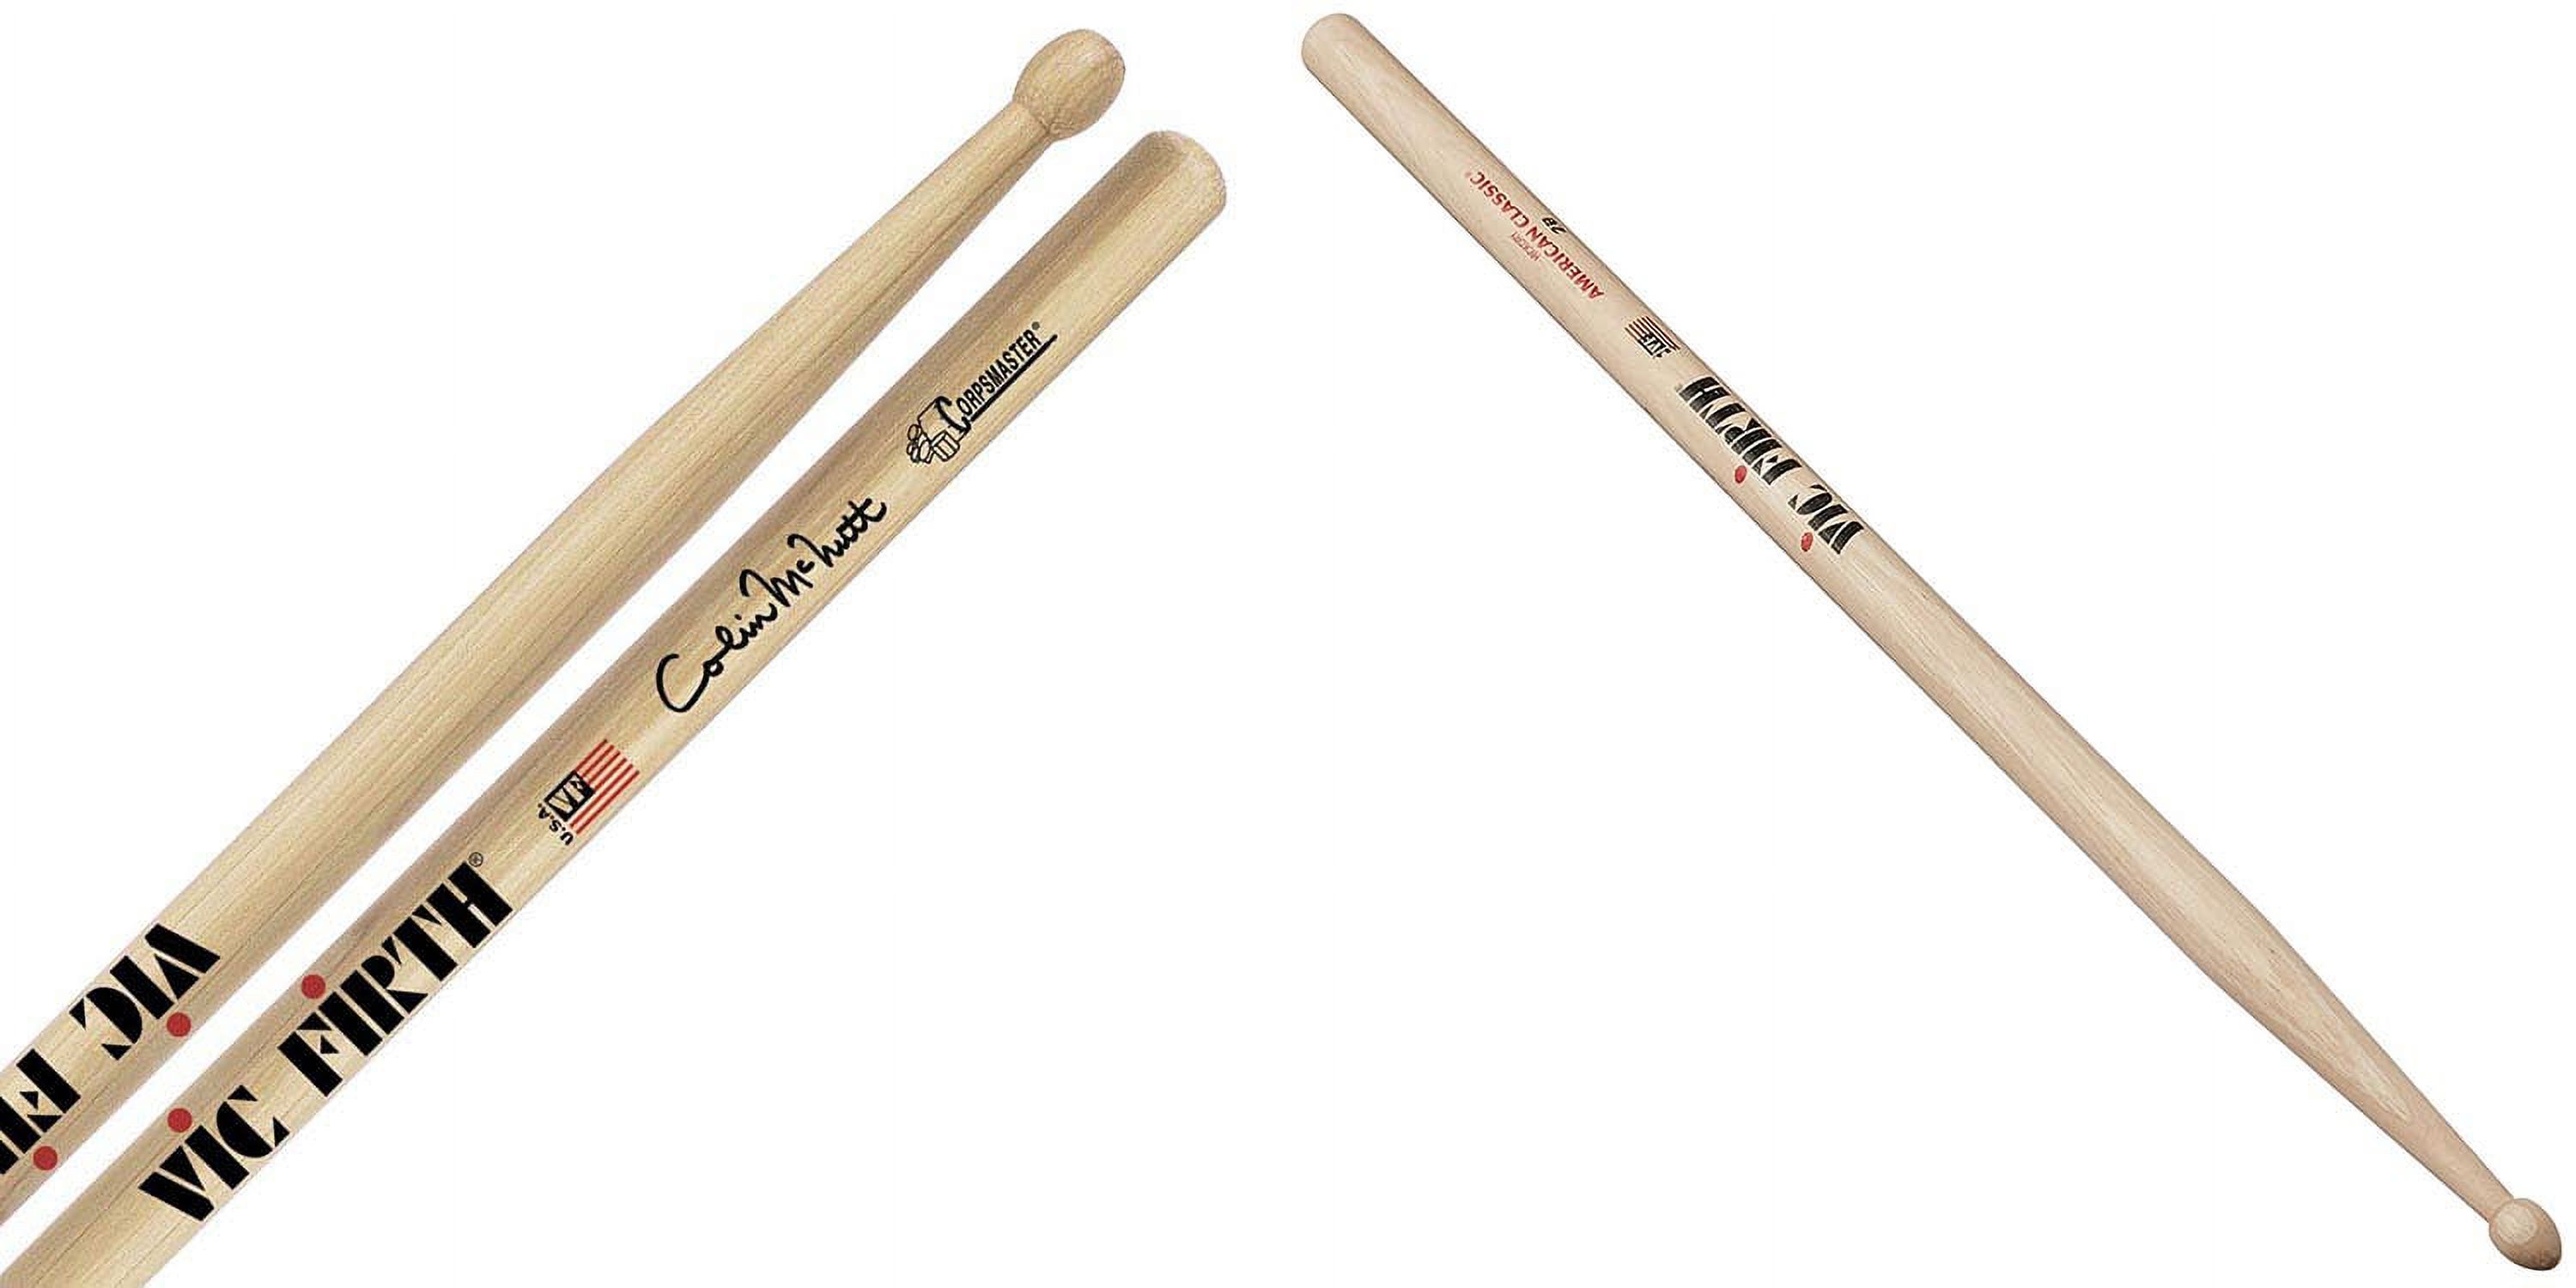 Vic Firth Corpsmaster Signature Snare Sticks Colin McNutt with Vic Firth American Classic 2B Drumsticks - image 3 of 3